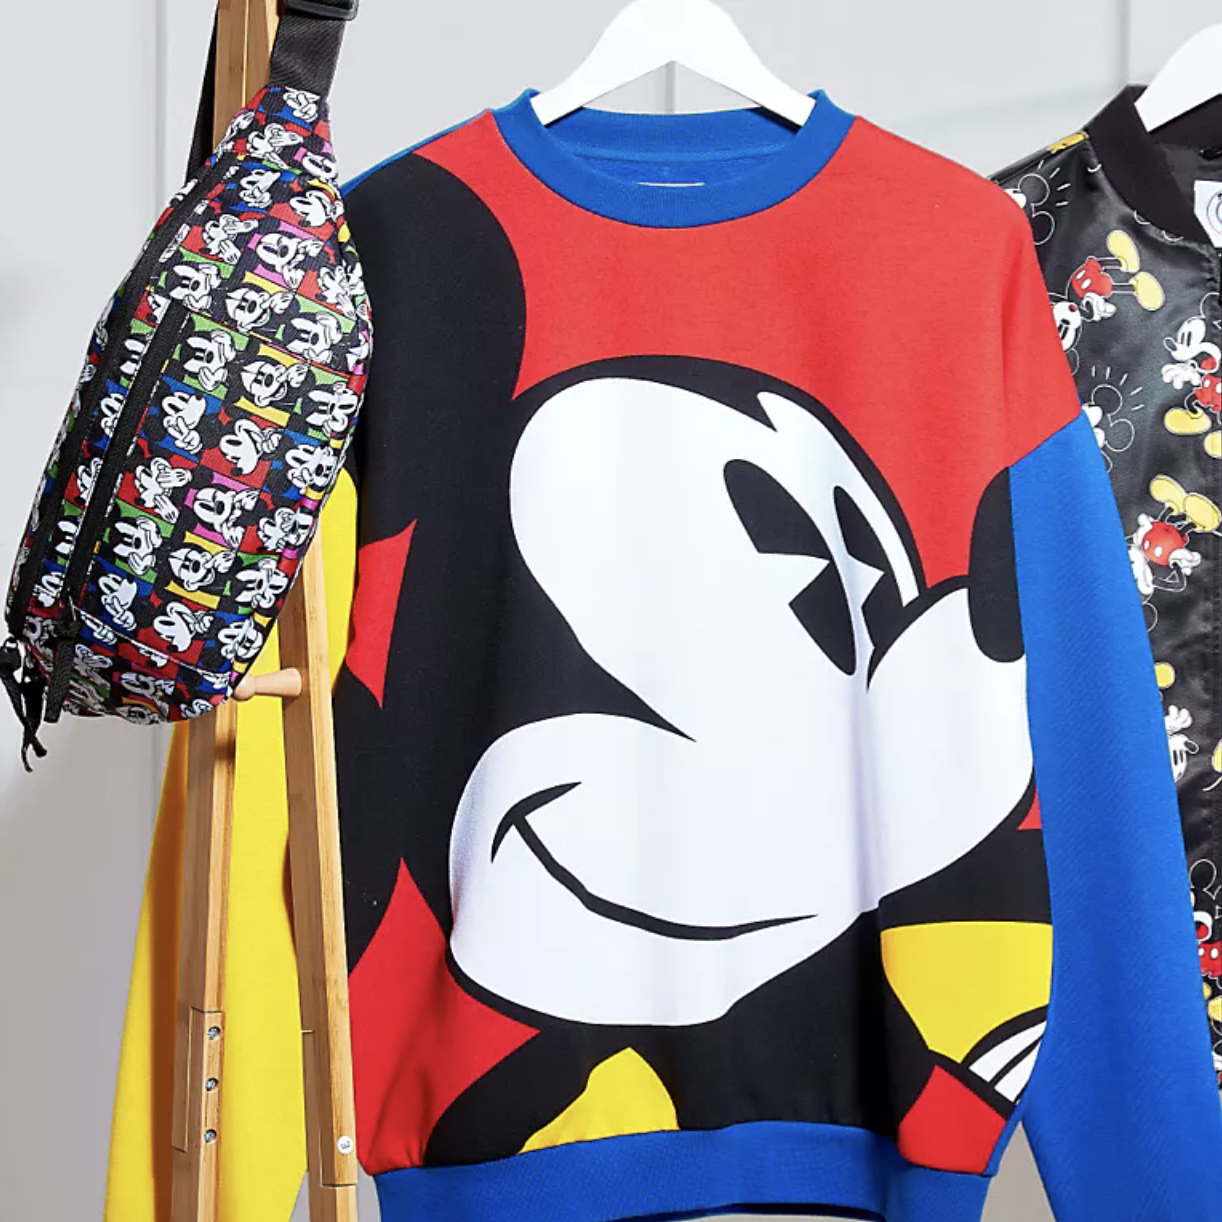 Mickey and Co. retro collection